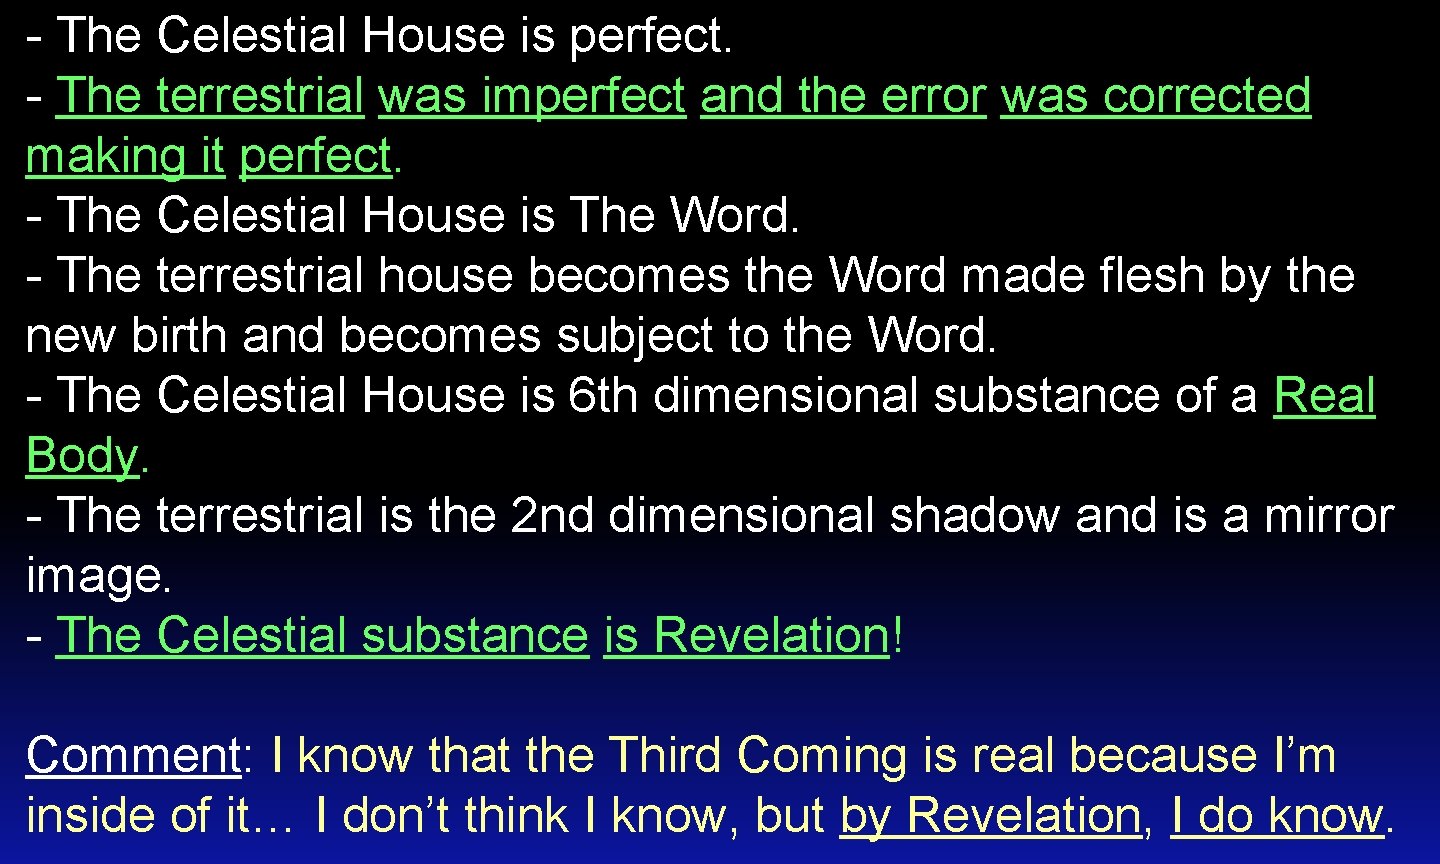 - The Celestial House is perfect. - The terrestrial was imperfect and the error